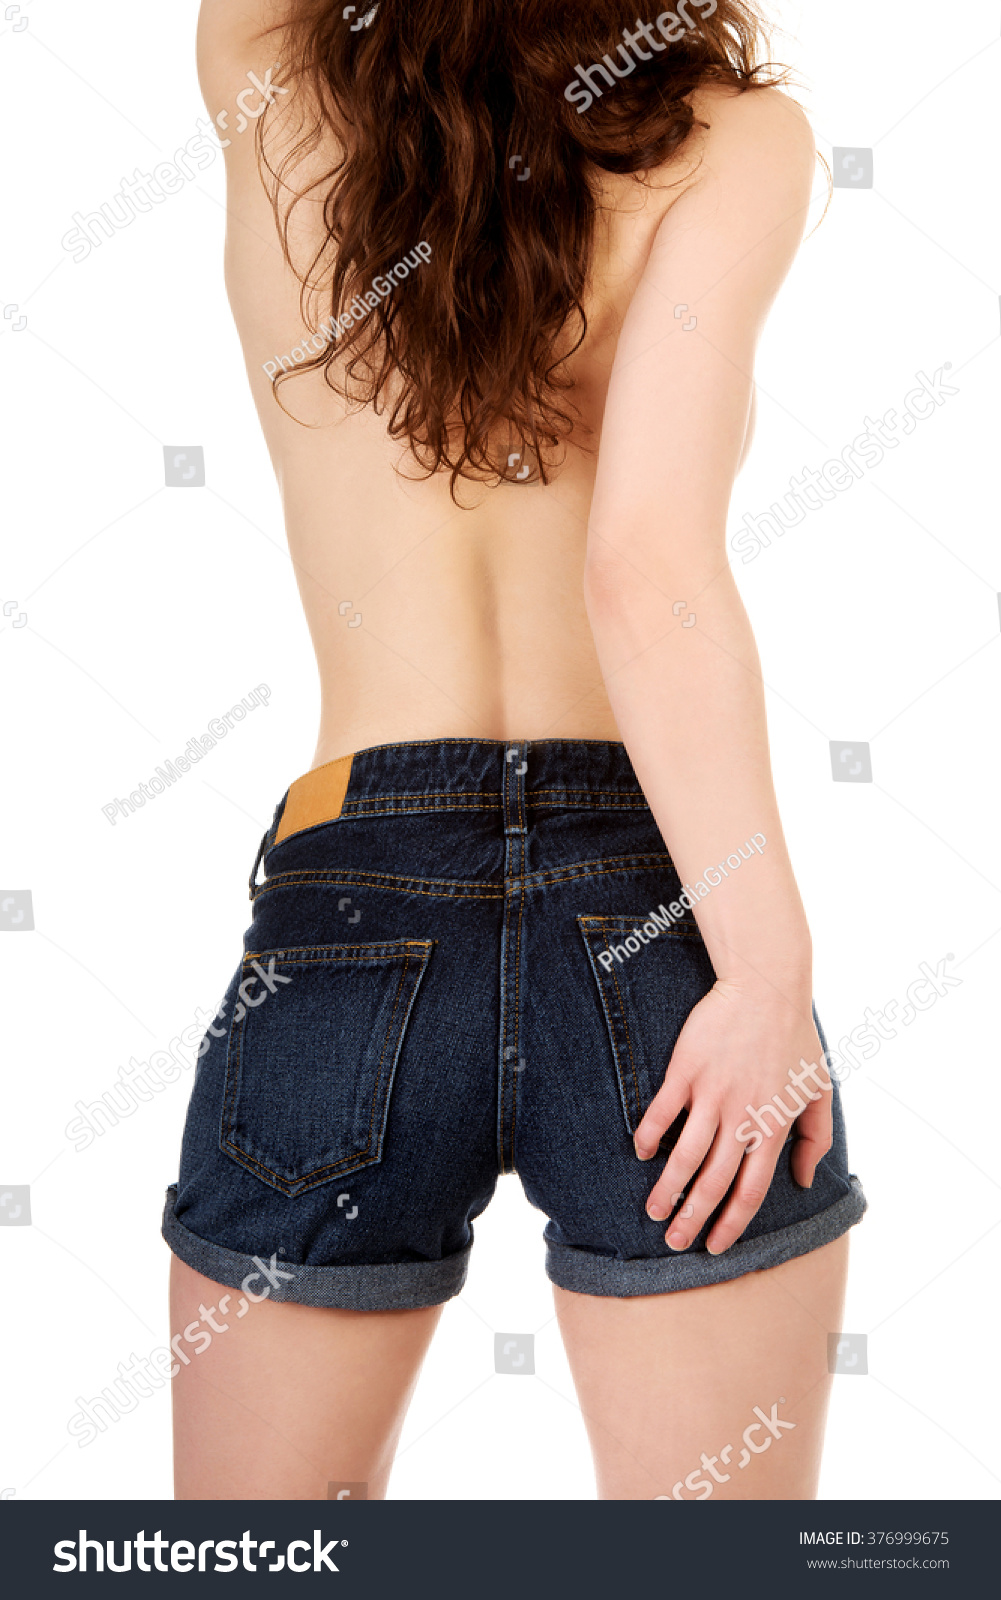 Shirtless Woman Jeans Shorts Stock Photo 376999675 Shutterstock